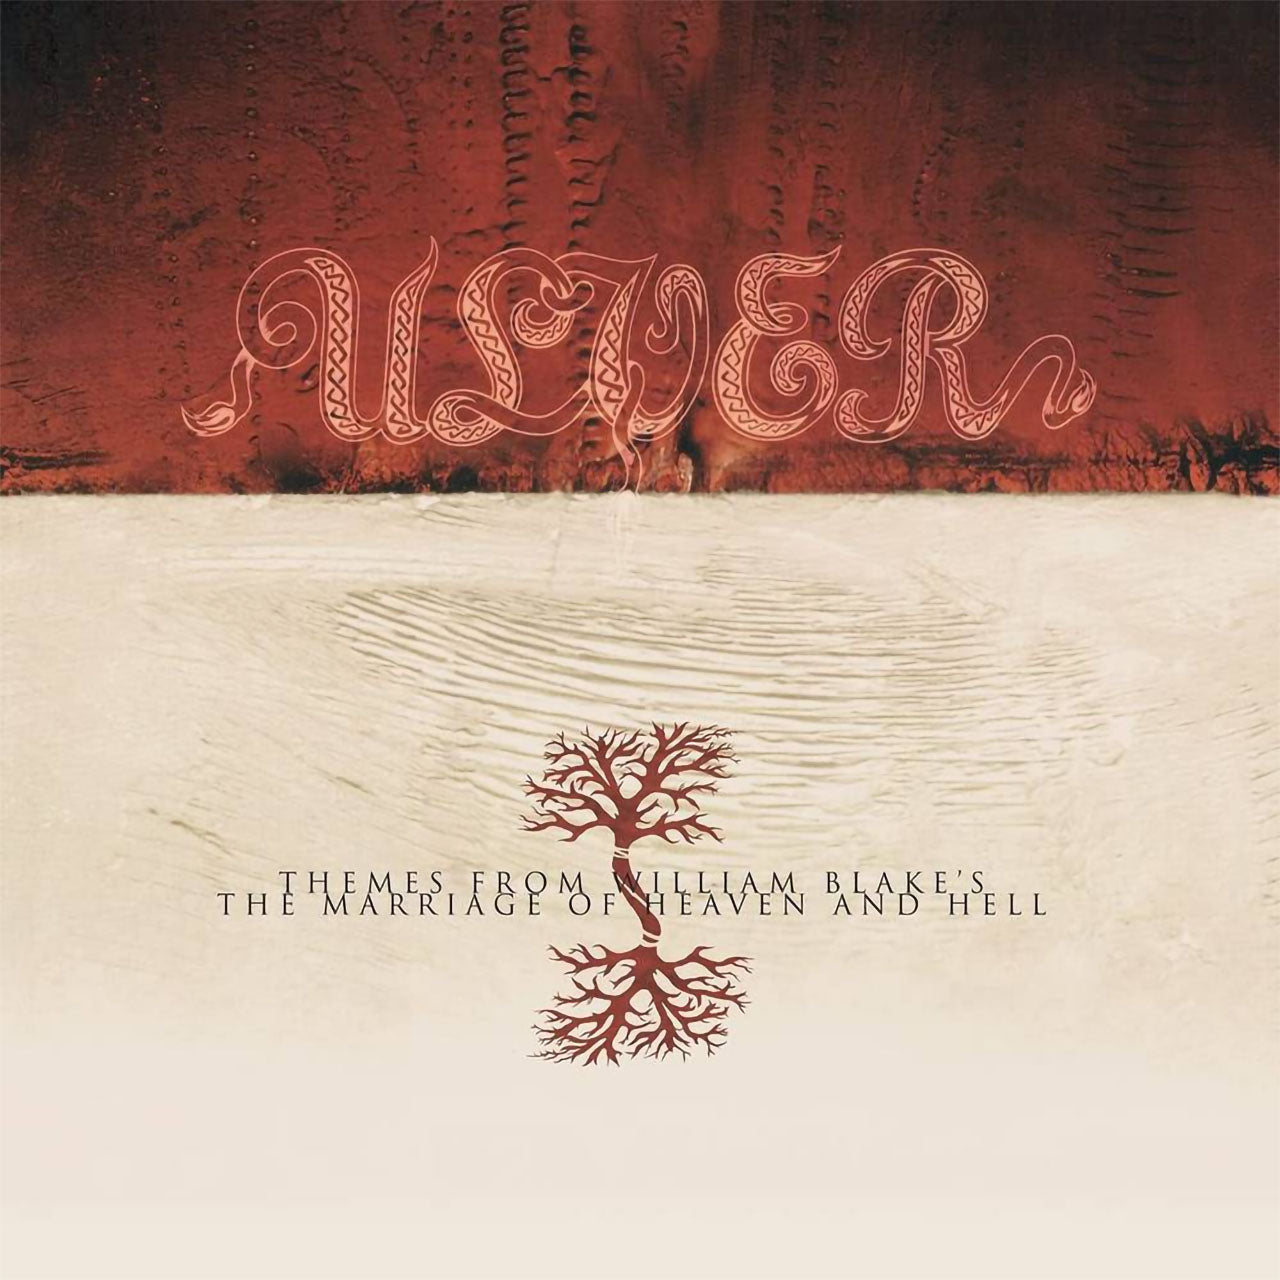 Ulver - Themes from William Blake's The Marriage of Heaven and Hell (2021 Reissue) (Digipak 2CD)